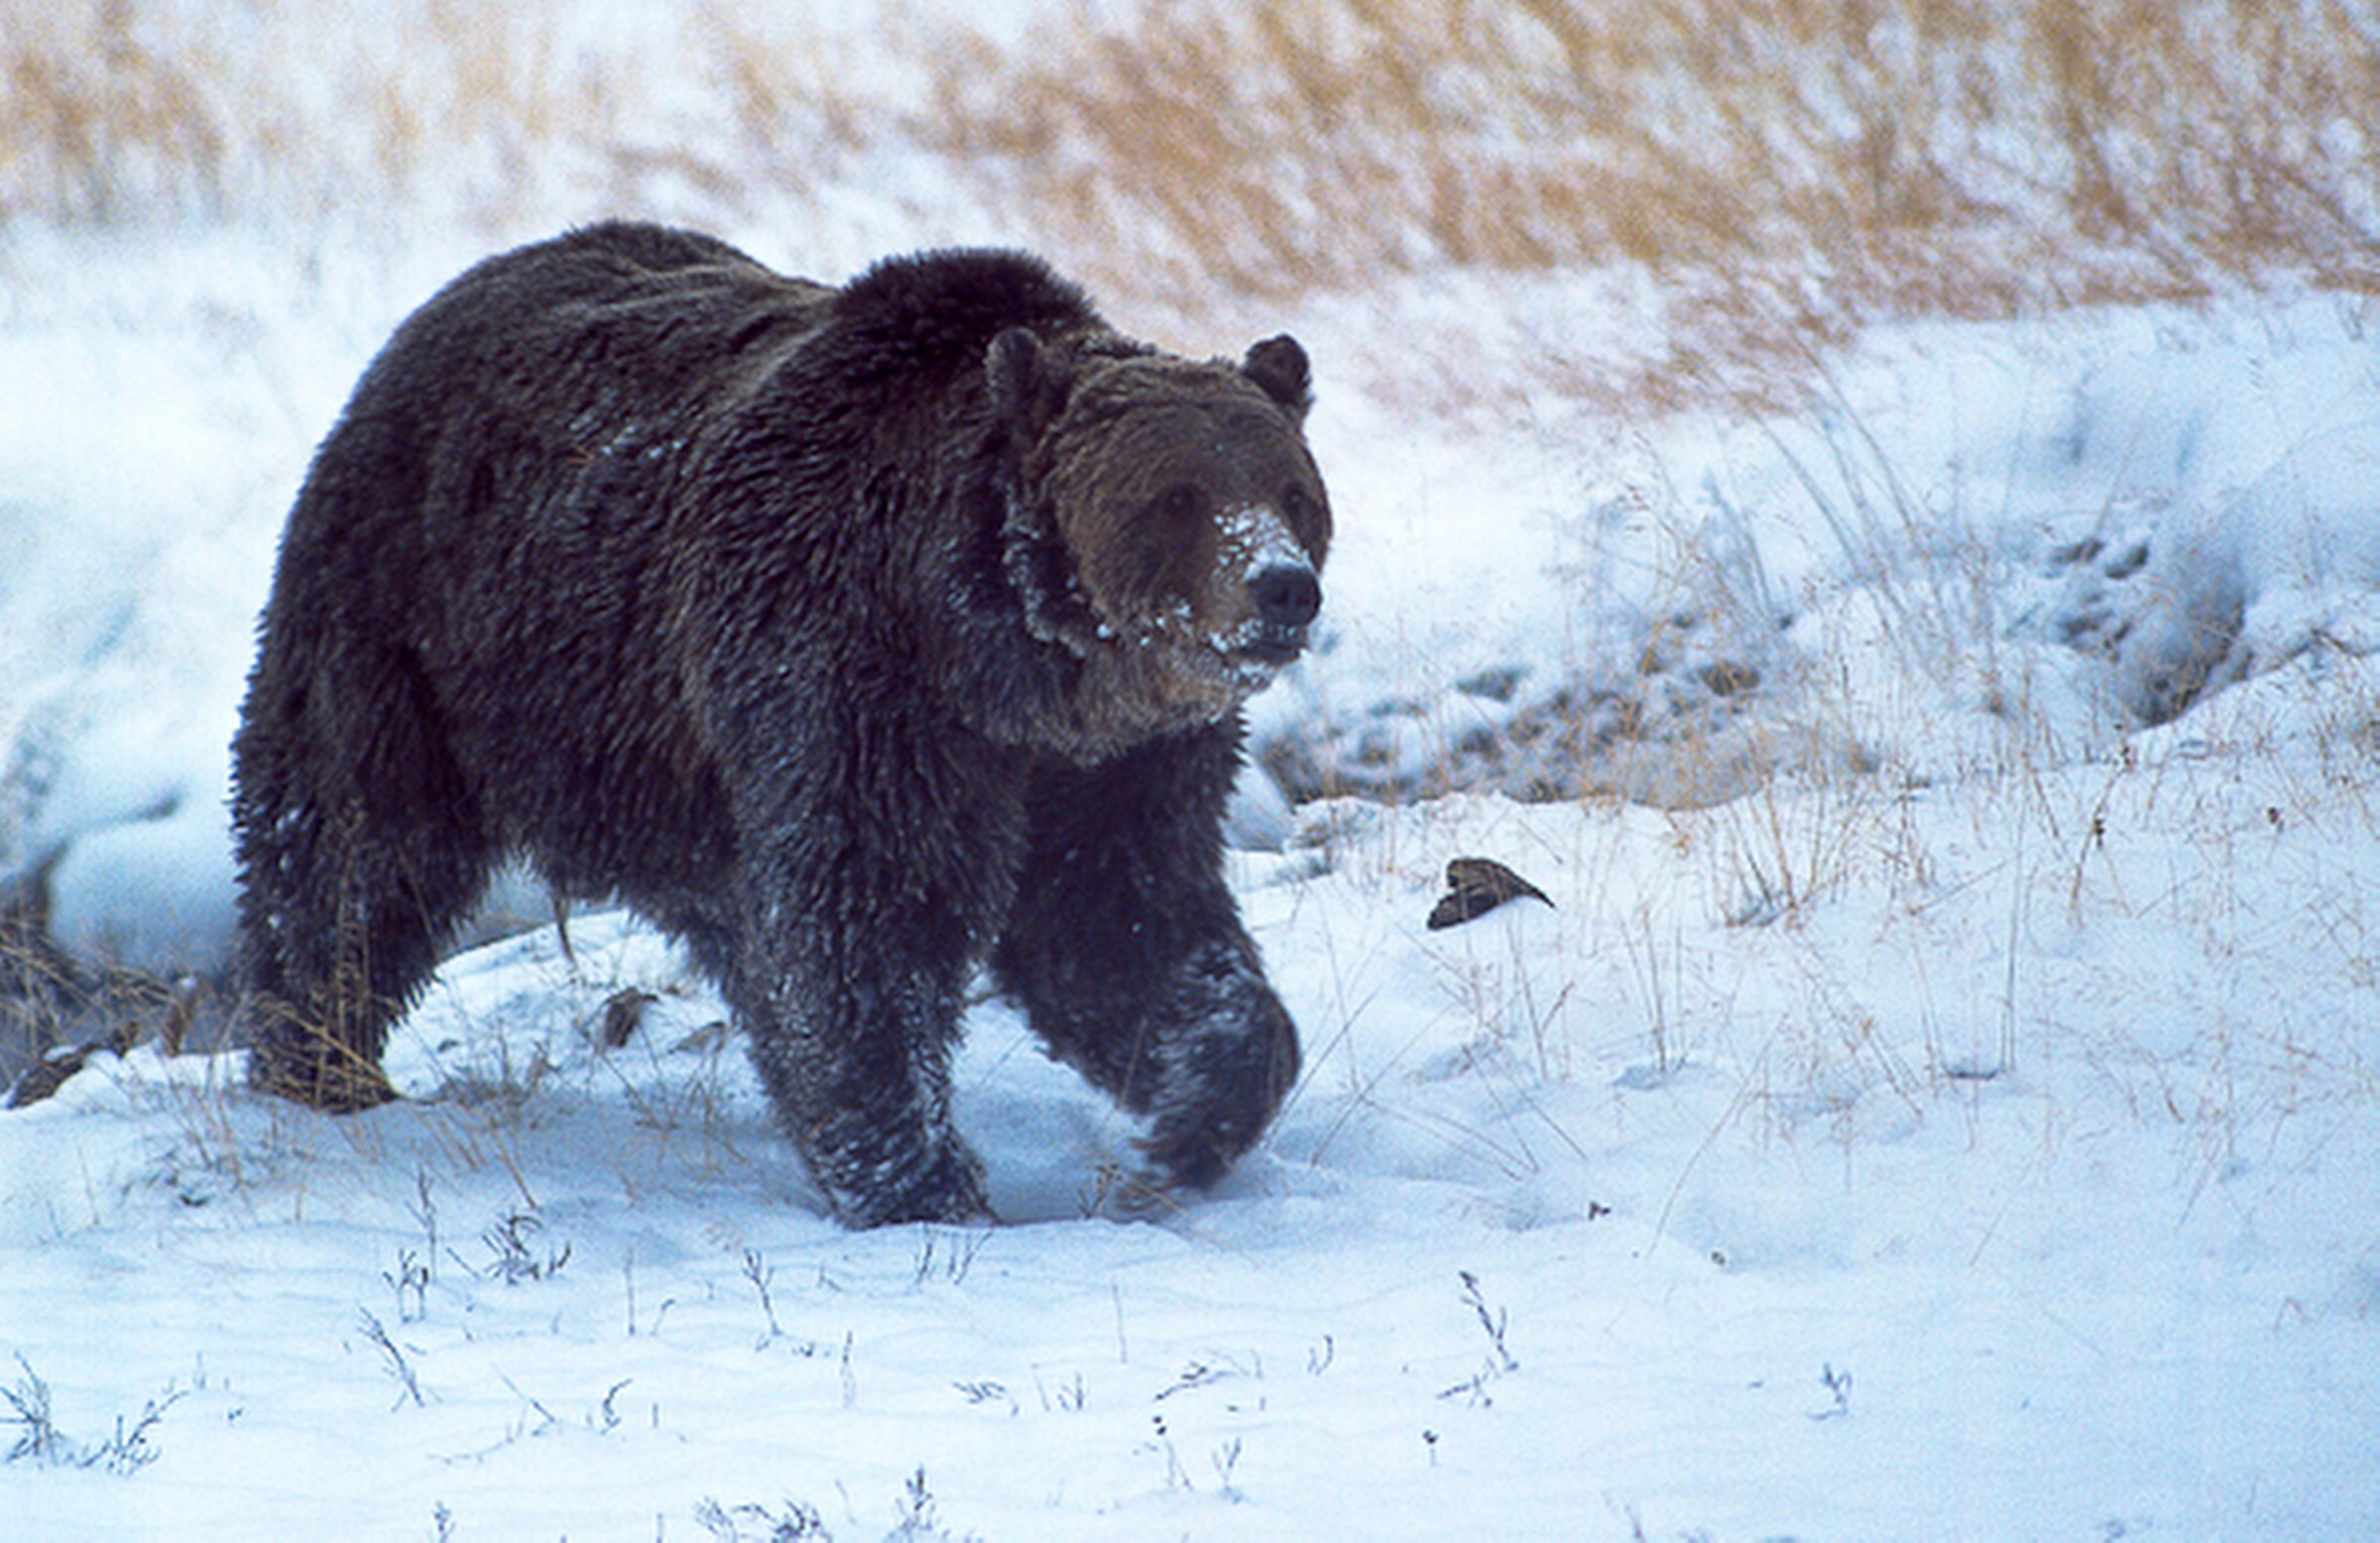 FILE - In this Oct. 2005, file photo provided by Ray Paunovich shows a well-known Yellowstone National Park grizzly bear known as "Scarface." Montana wildlife officials have confirmed that the grizzly bear was shot and killed during a confrontation with a hunter north of Gardiner last fall. (Ray Paunovich via AP, File)